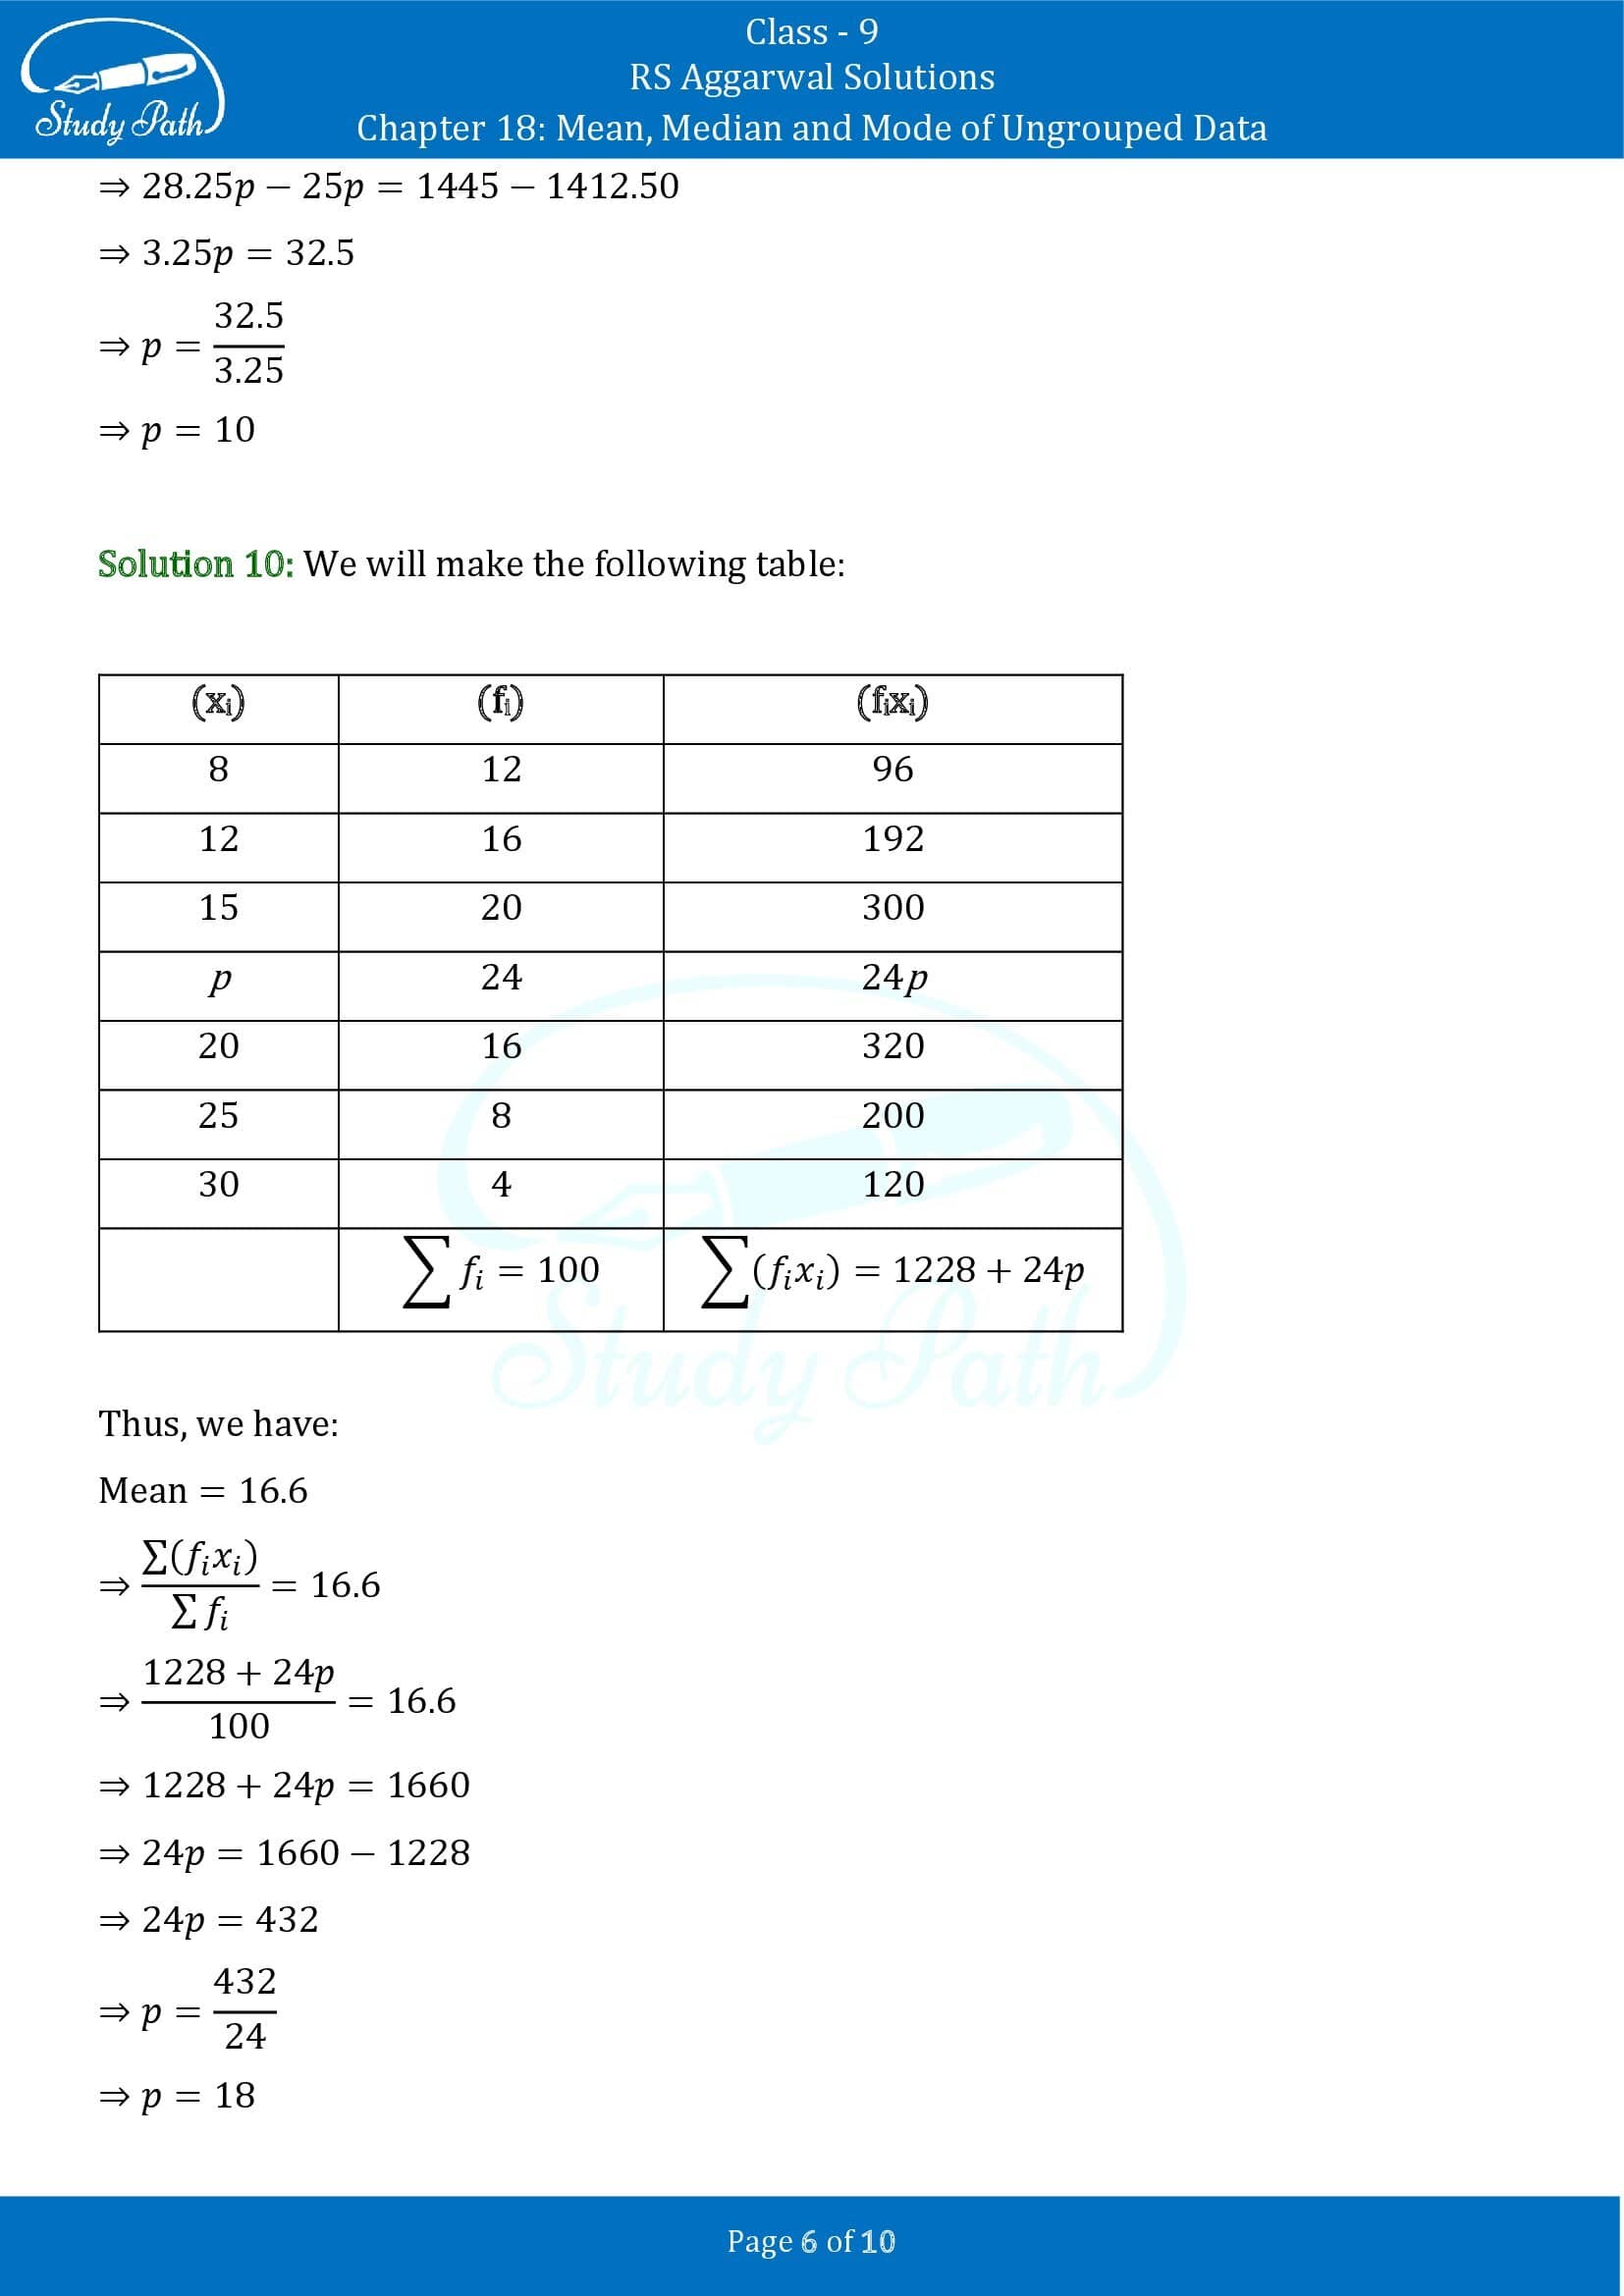 RS Aggarwal Solutions Class 9 Chapter 18 Mean Median and Mode of Ungrouped Data Exercise 18B 00006